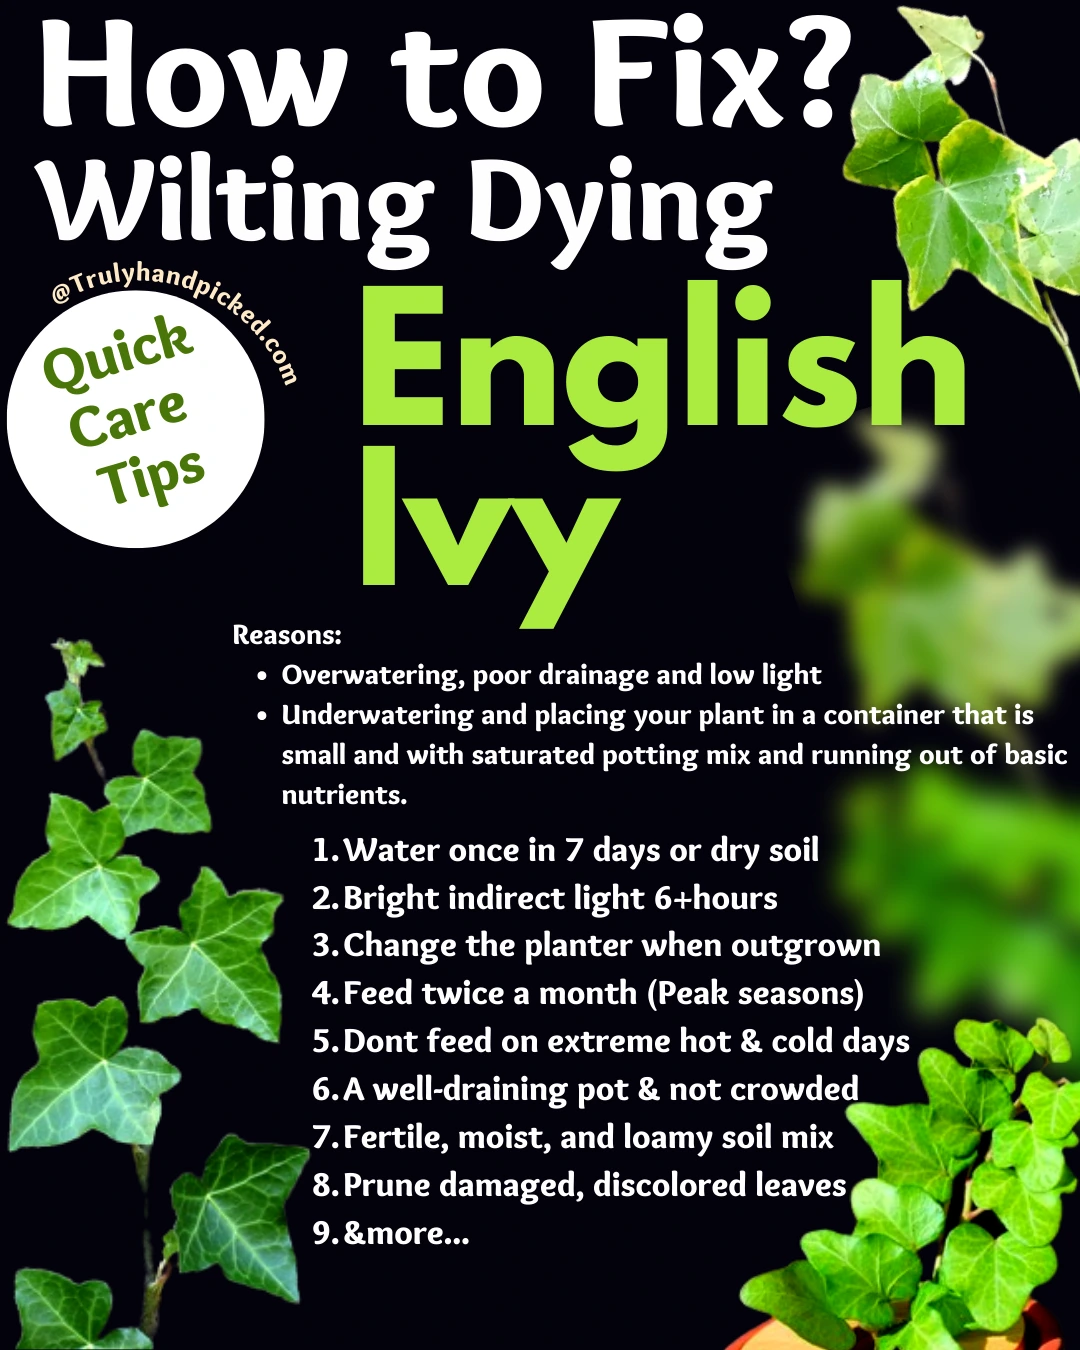 Browning and drooping English ivy how to revive quick care tips